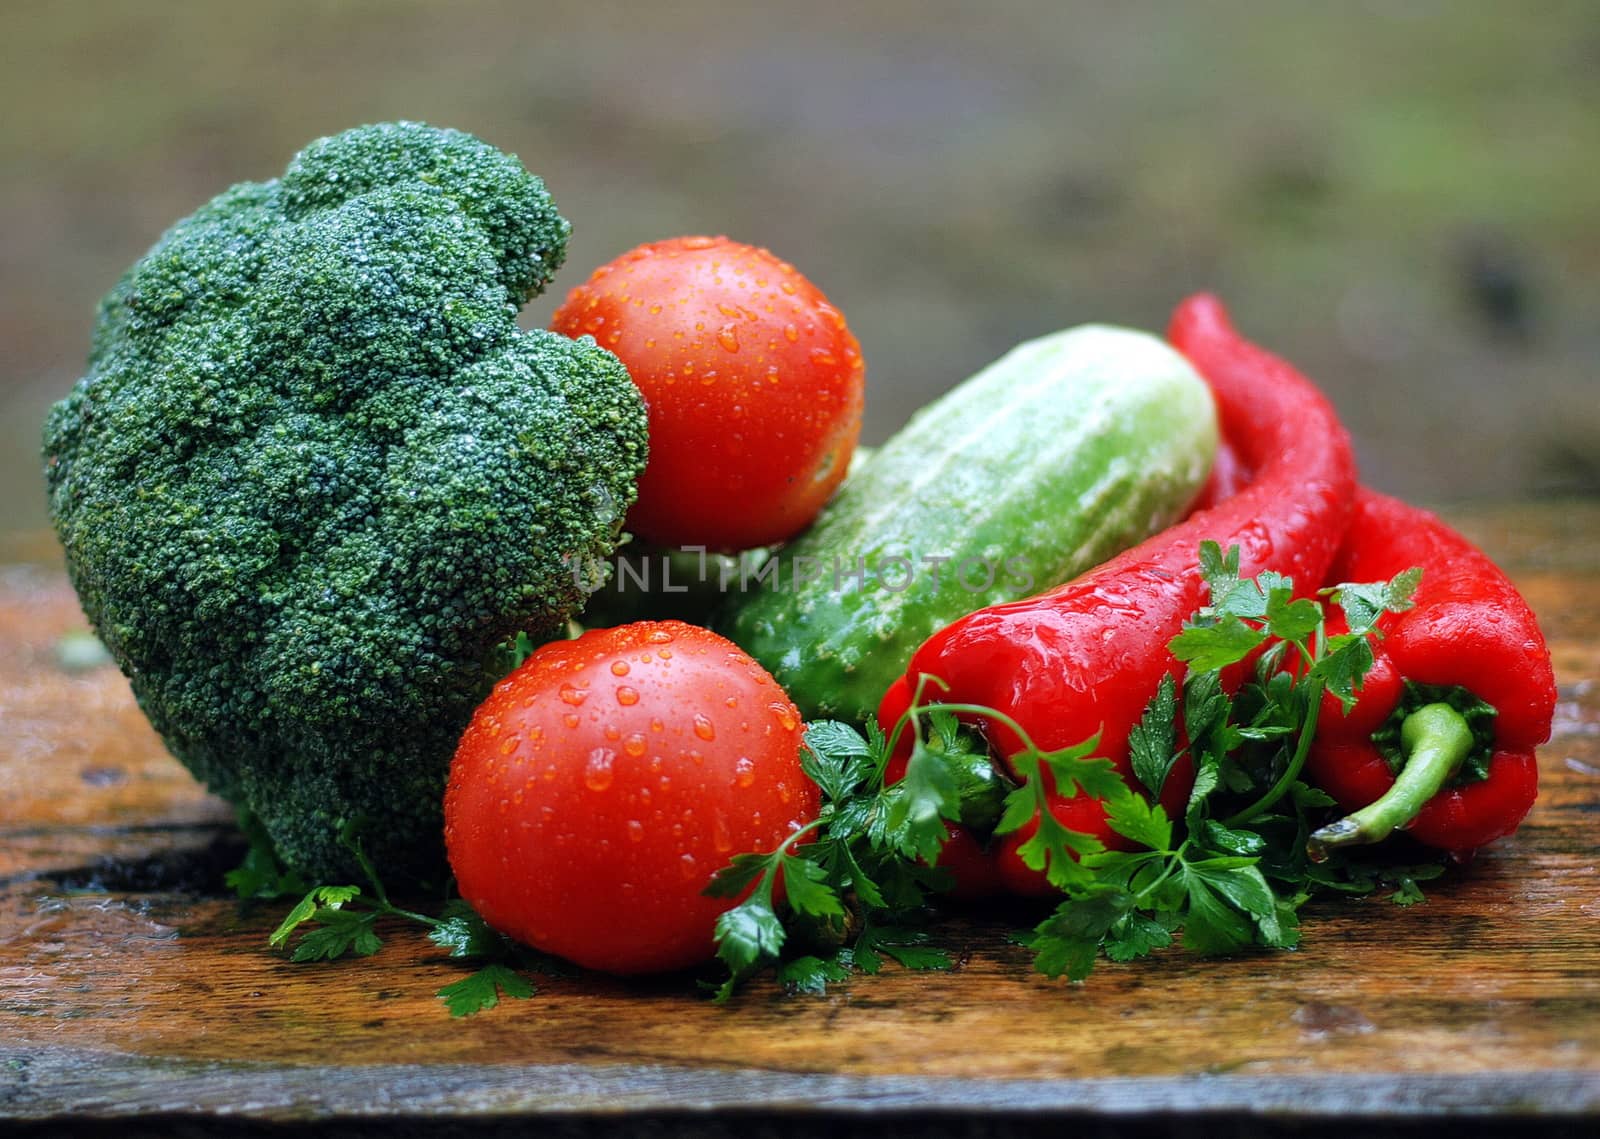 In images Fresh organic vegetables. Food background. Healthy food from garden